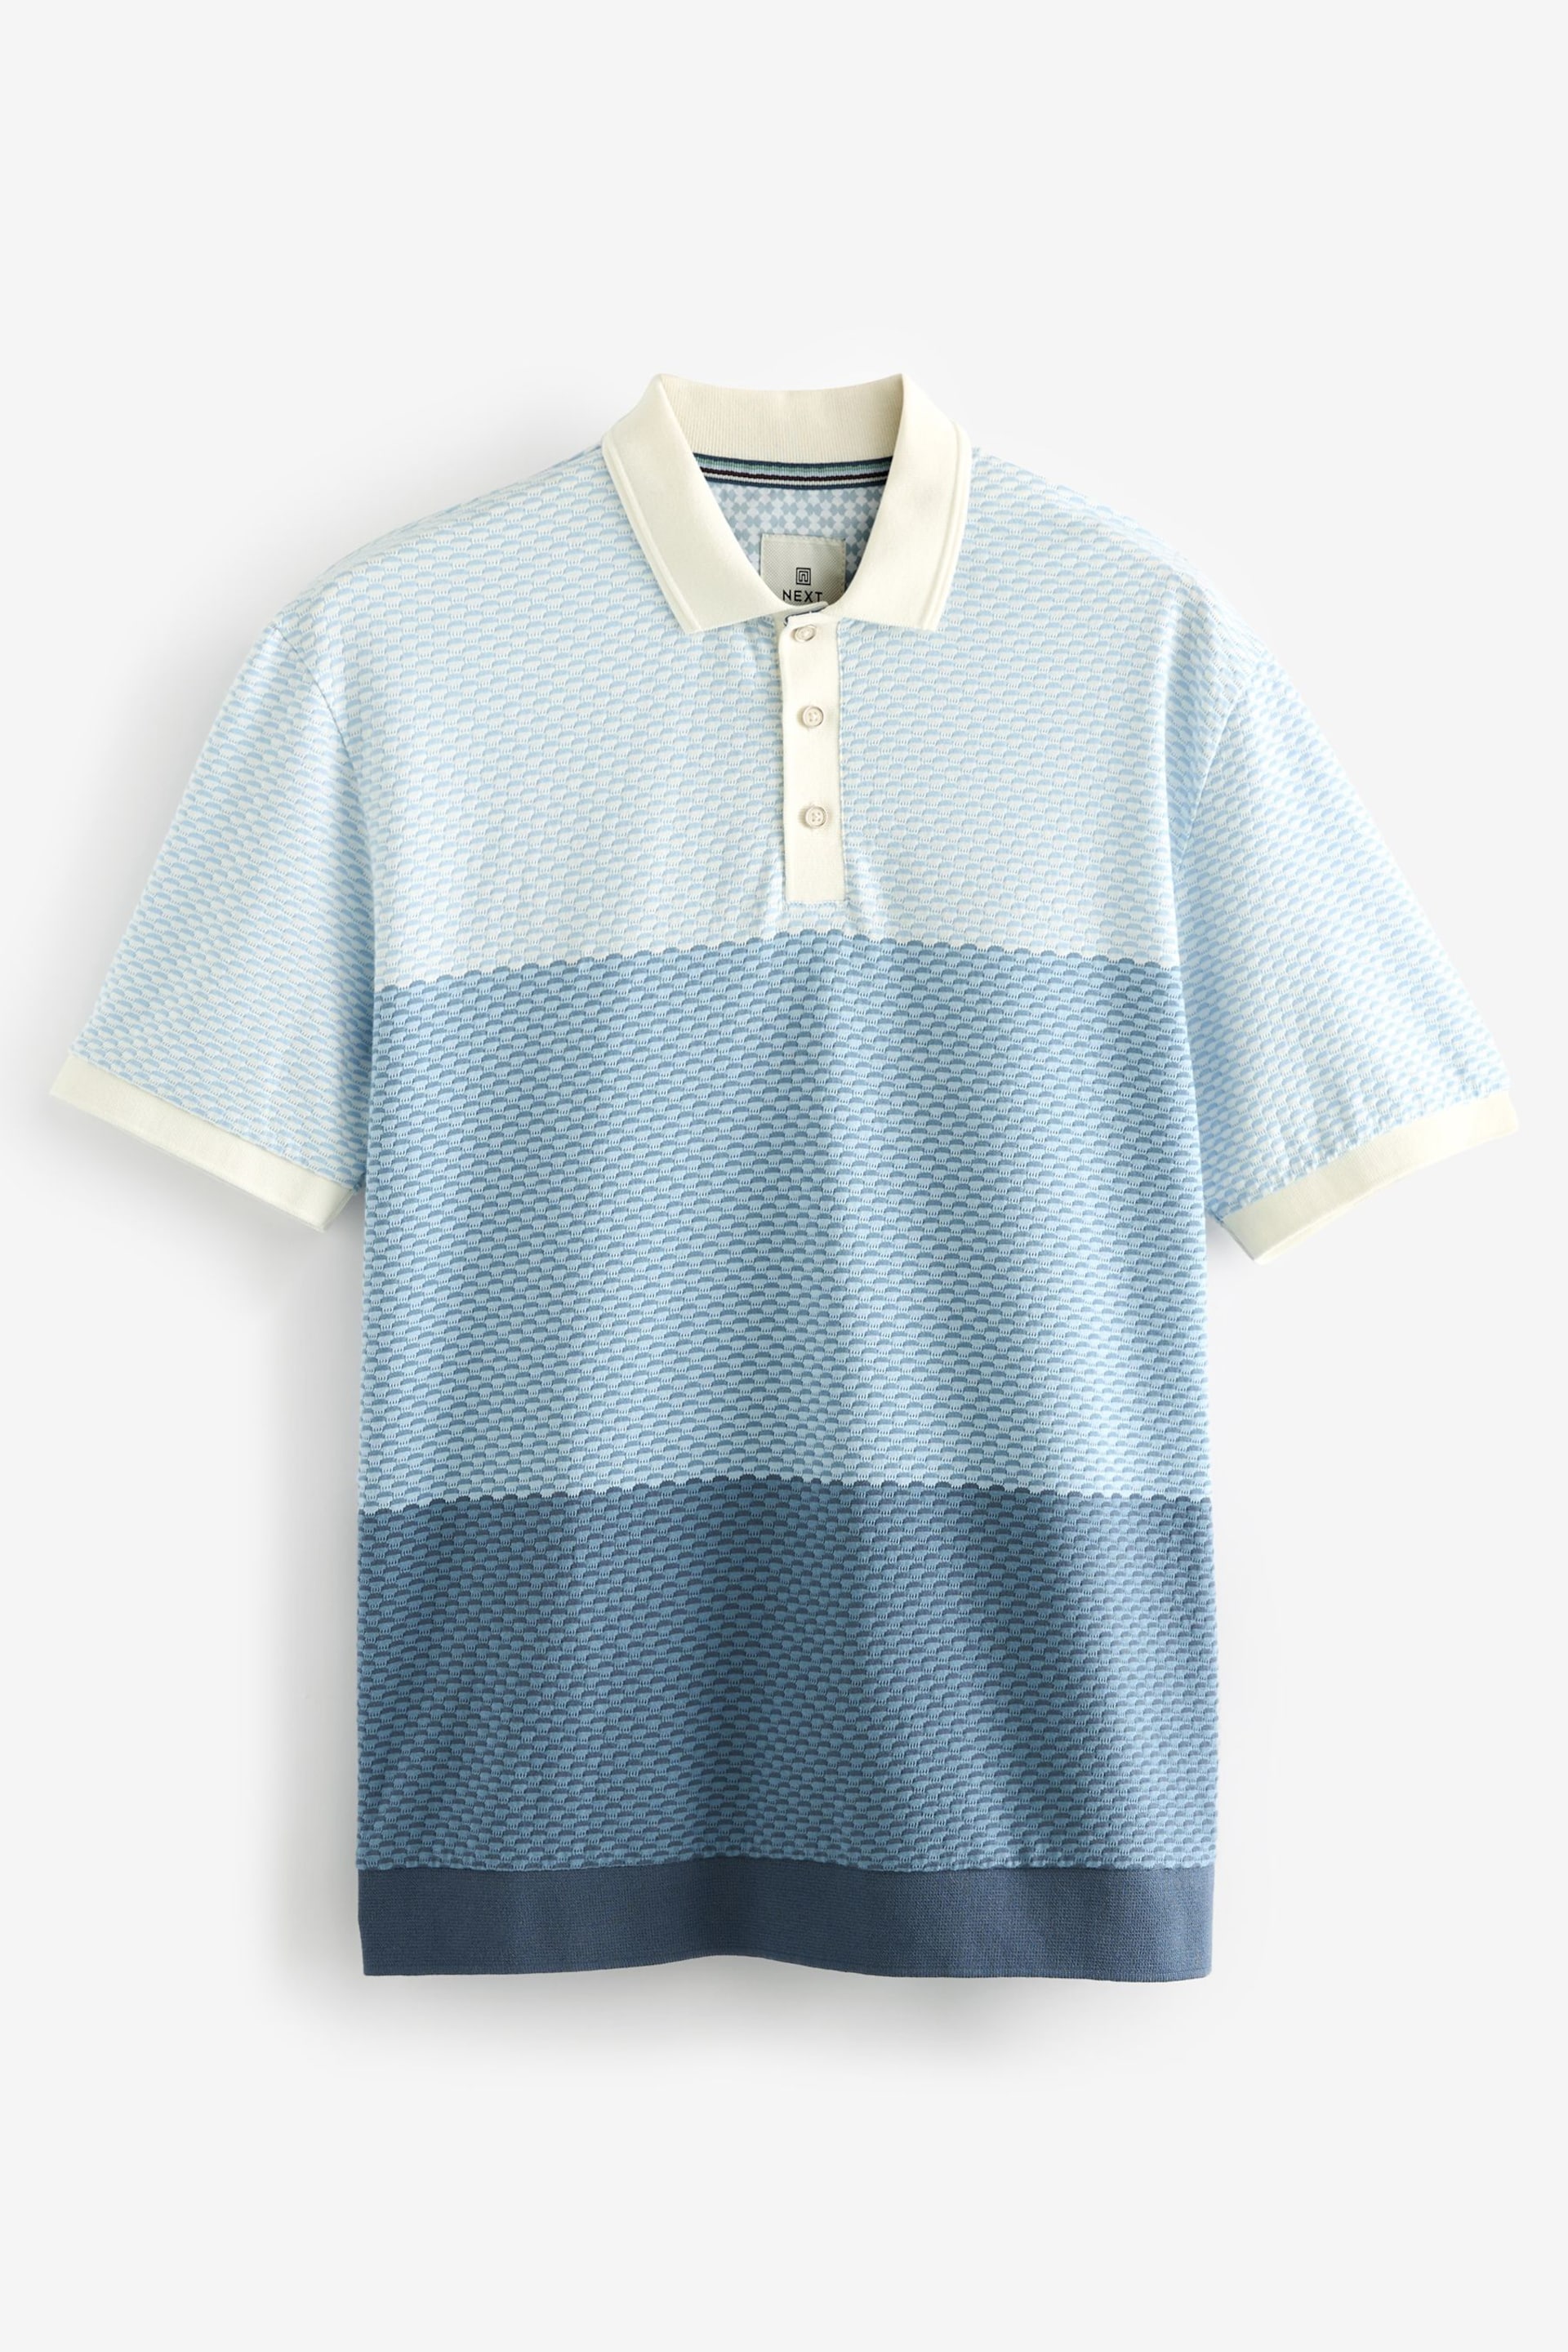 Blue Textured Colour Block Polo Shirt - Image 5 of 7